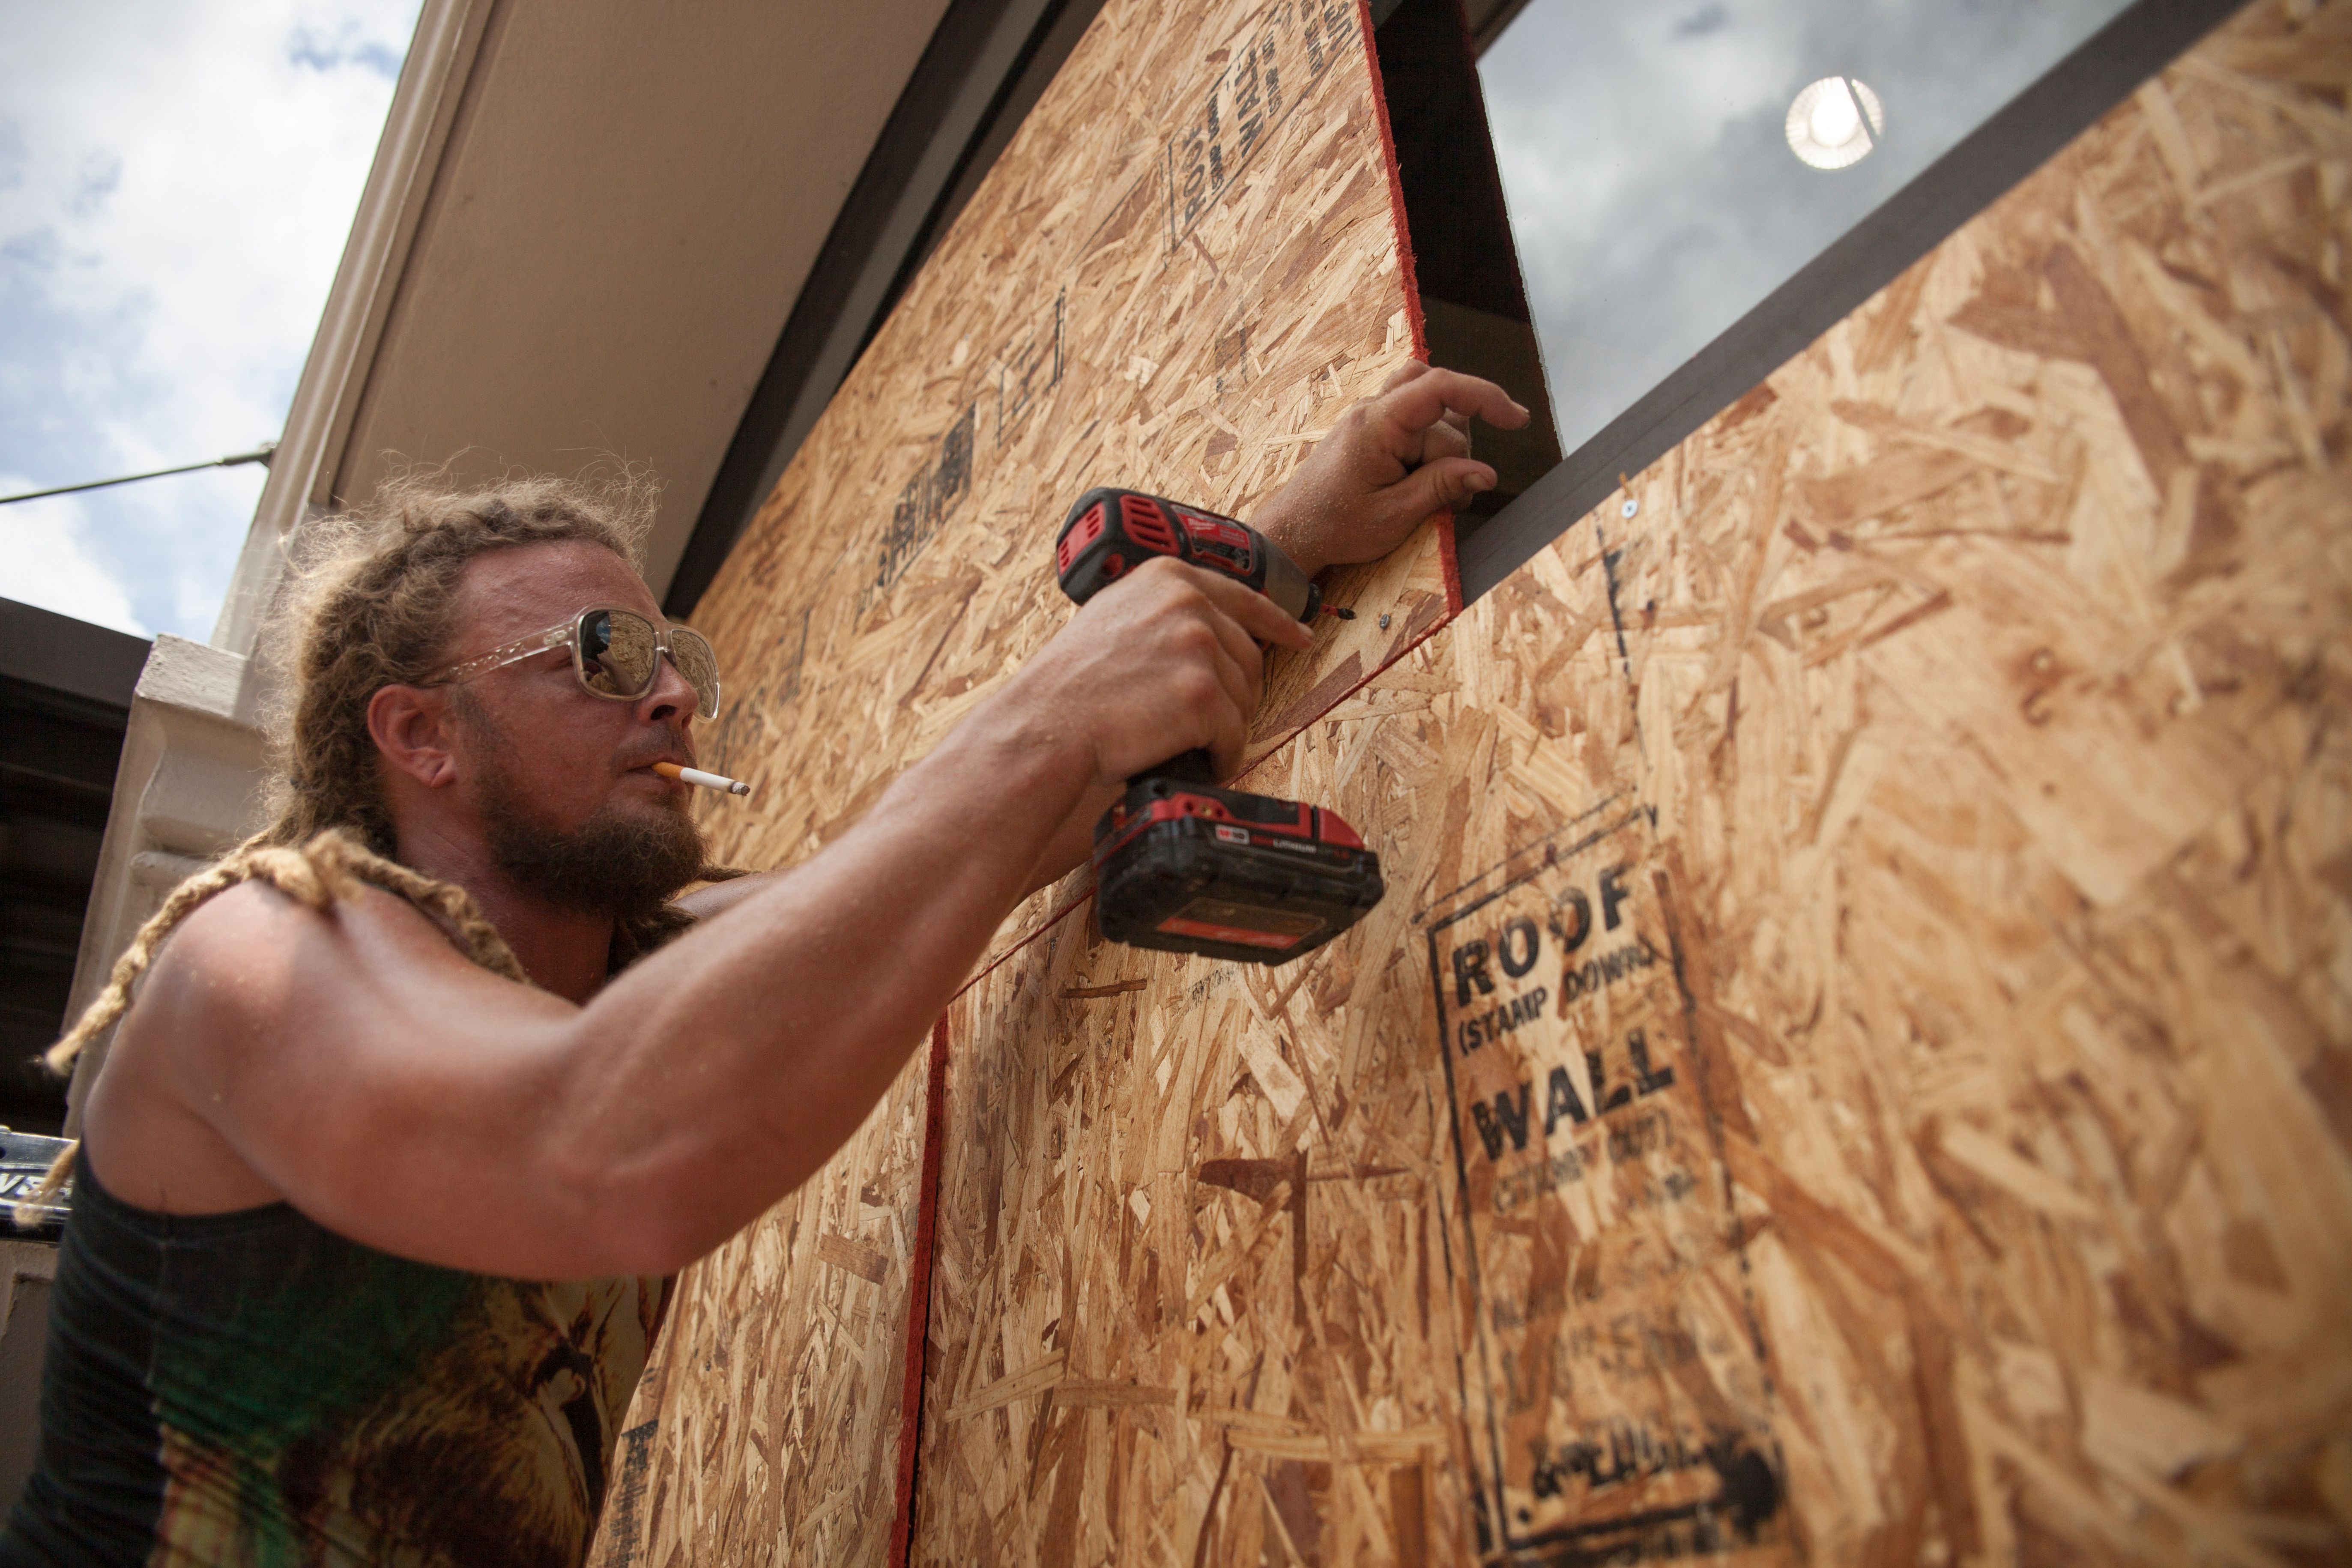 Matt Harrington boards up a Vans shoe store near the French Quarter in New Orleans as Tropical Storm Barry approaches on July 11, 2019.